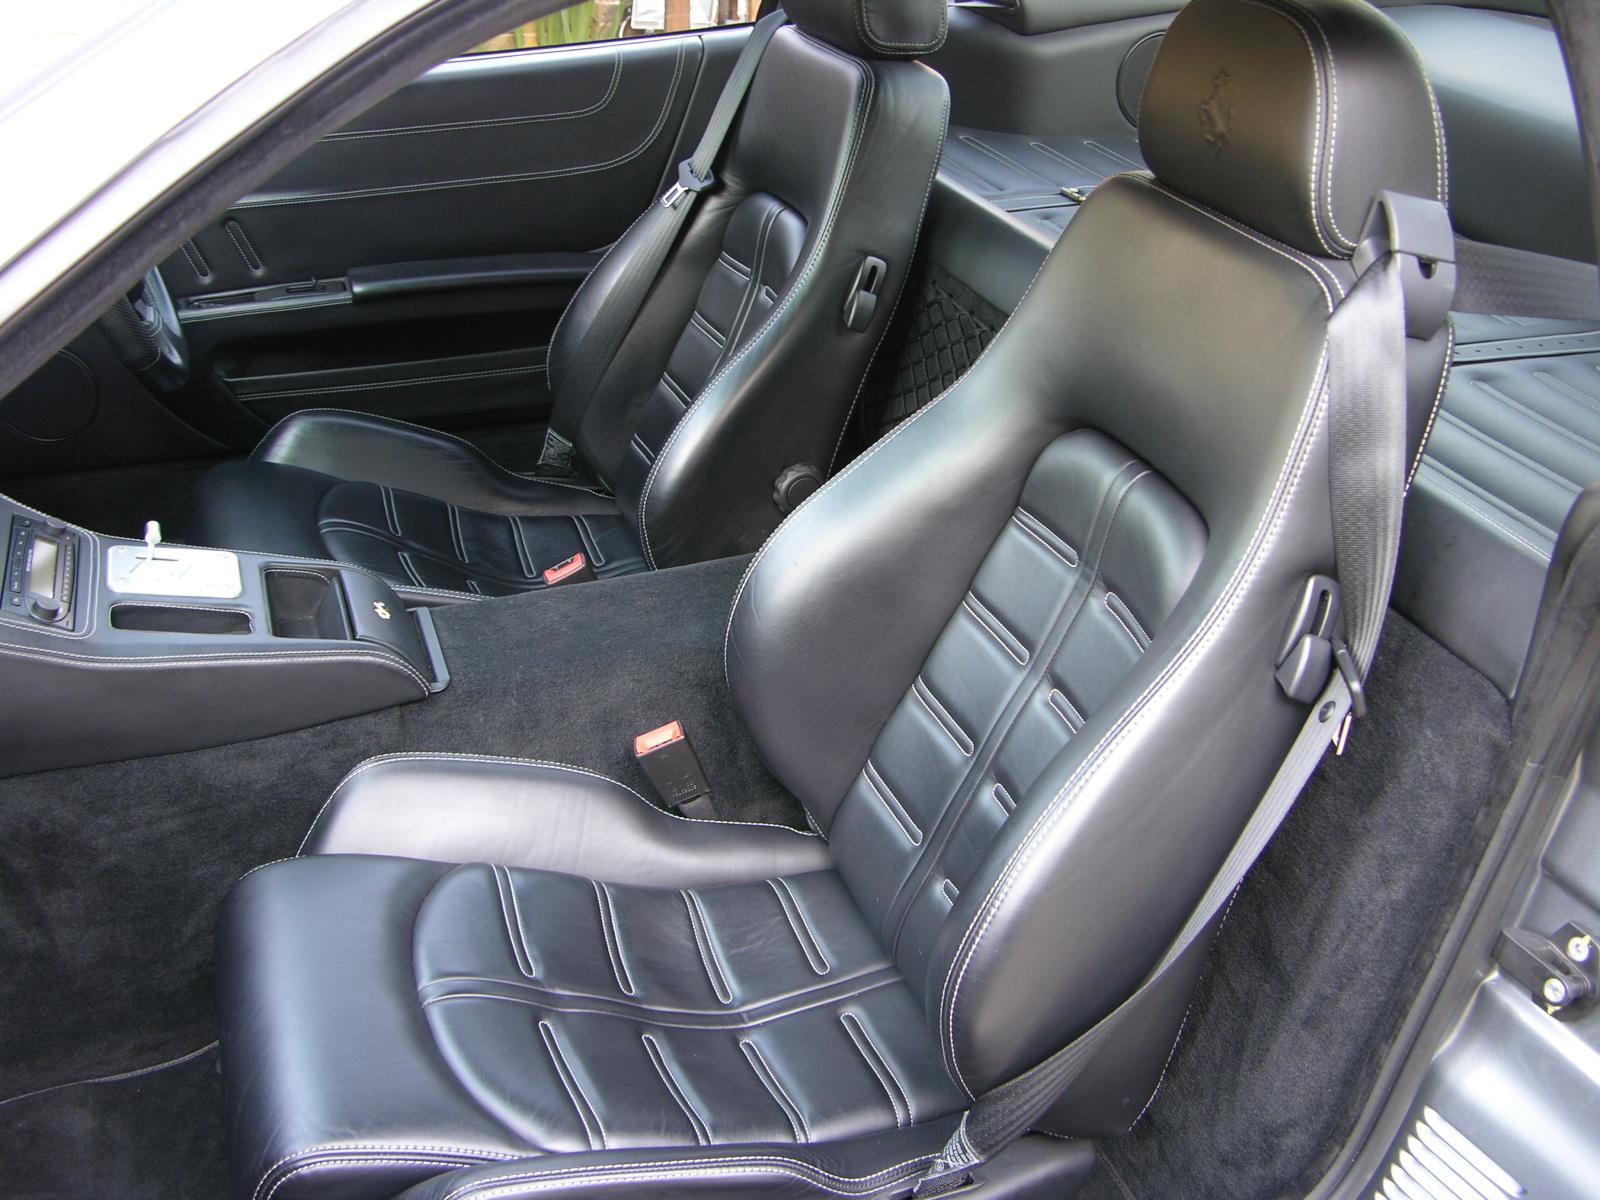 the interior of a modern car with modern leather seats